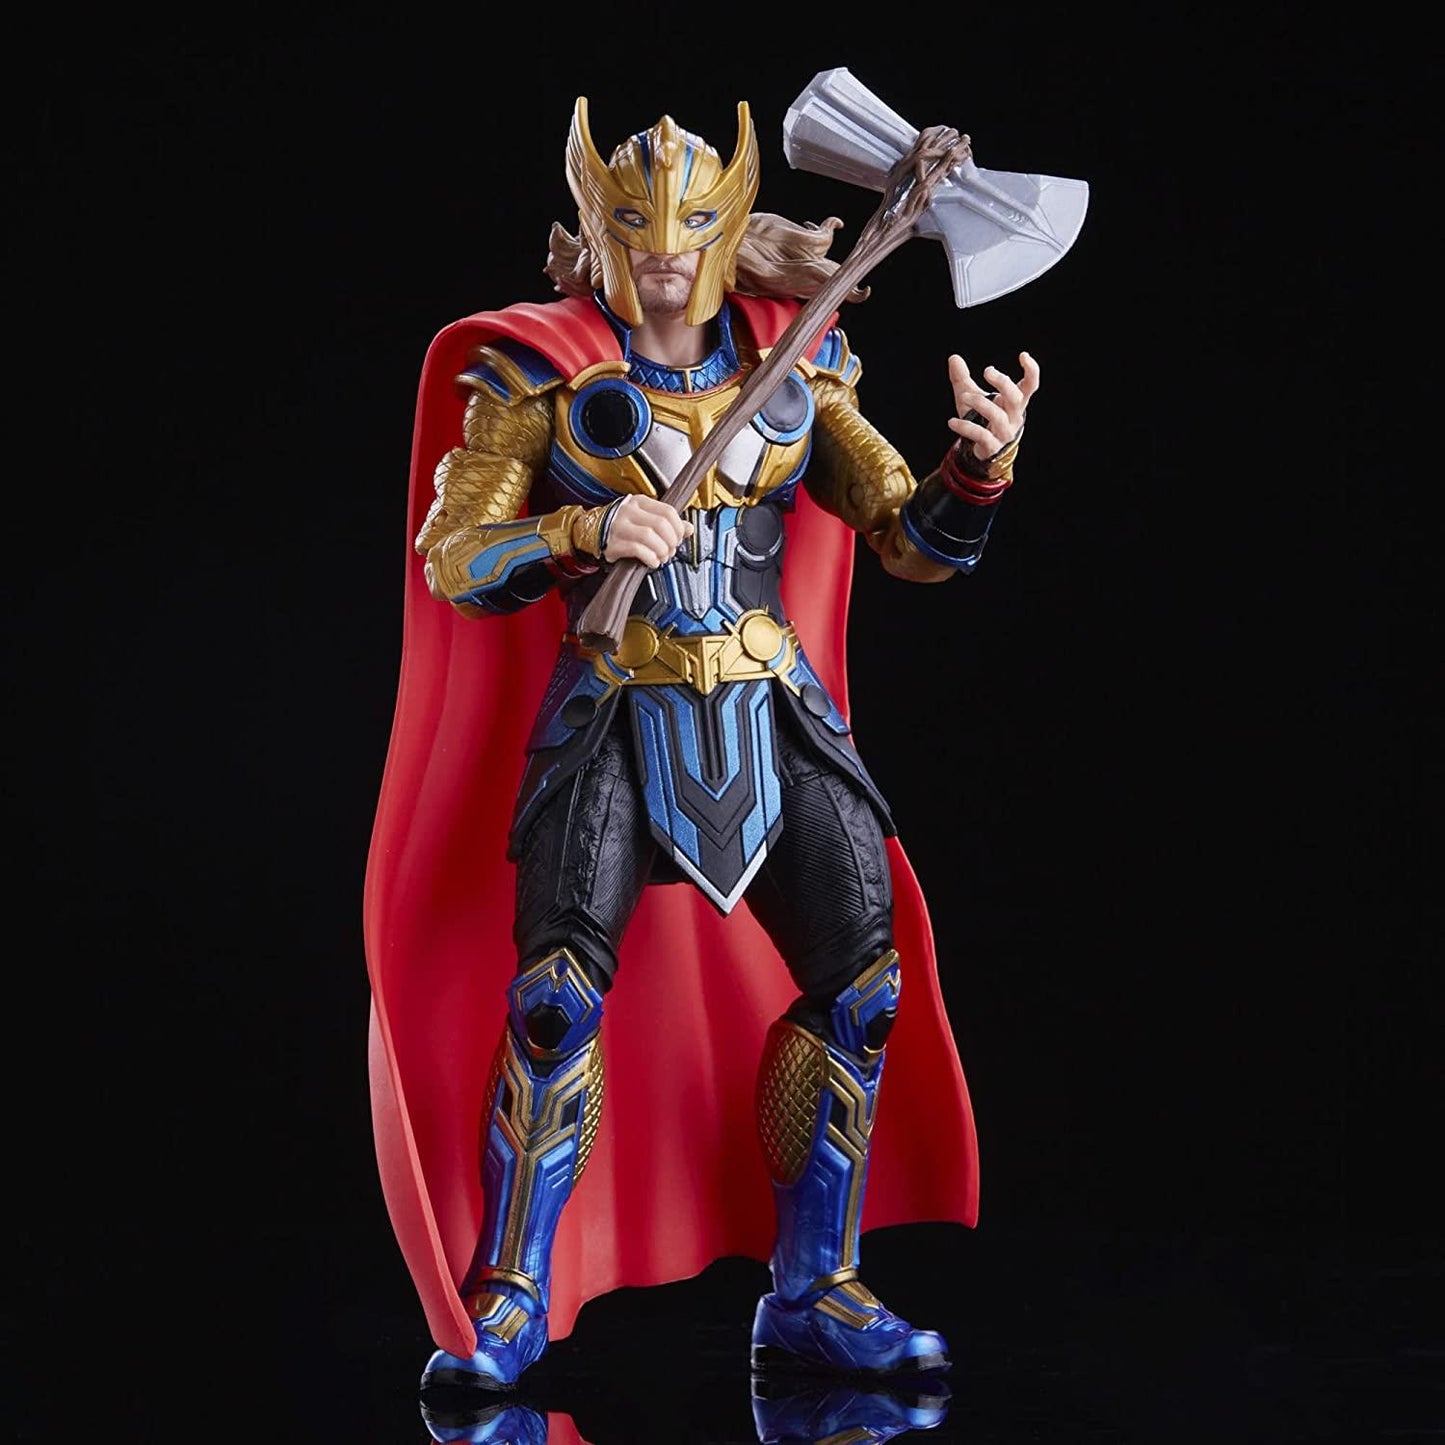 Thor Movie Legends 6in Thor Action Figure